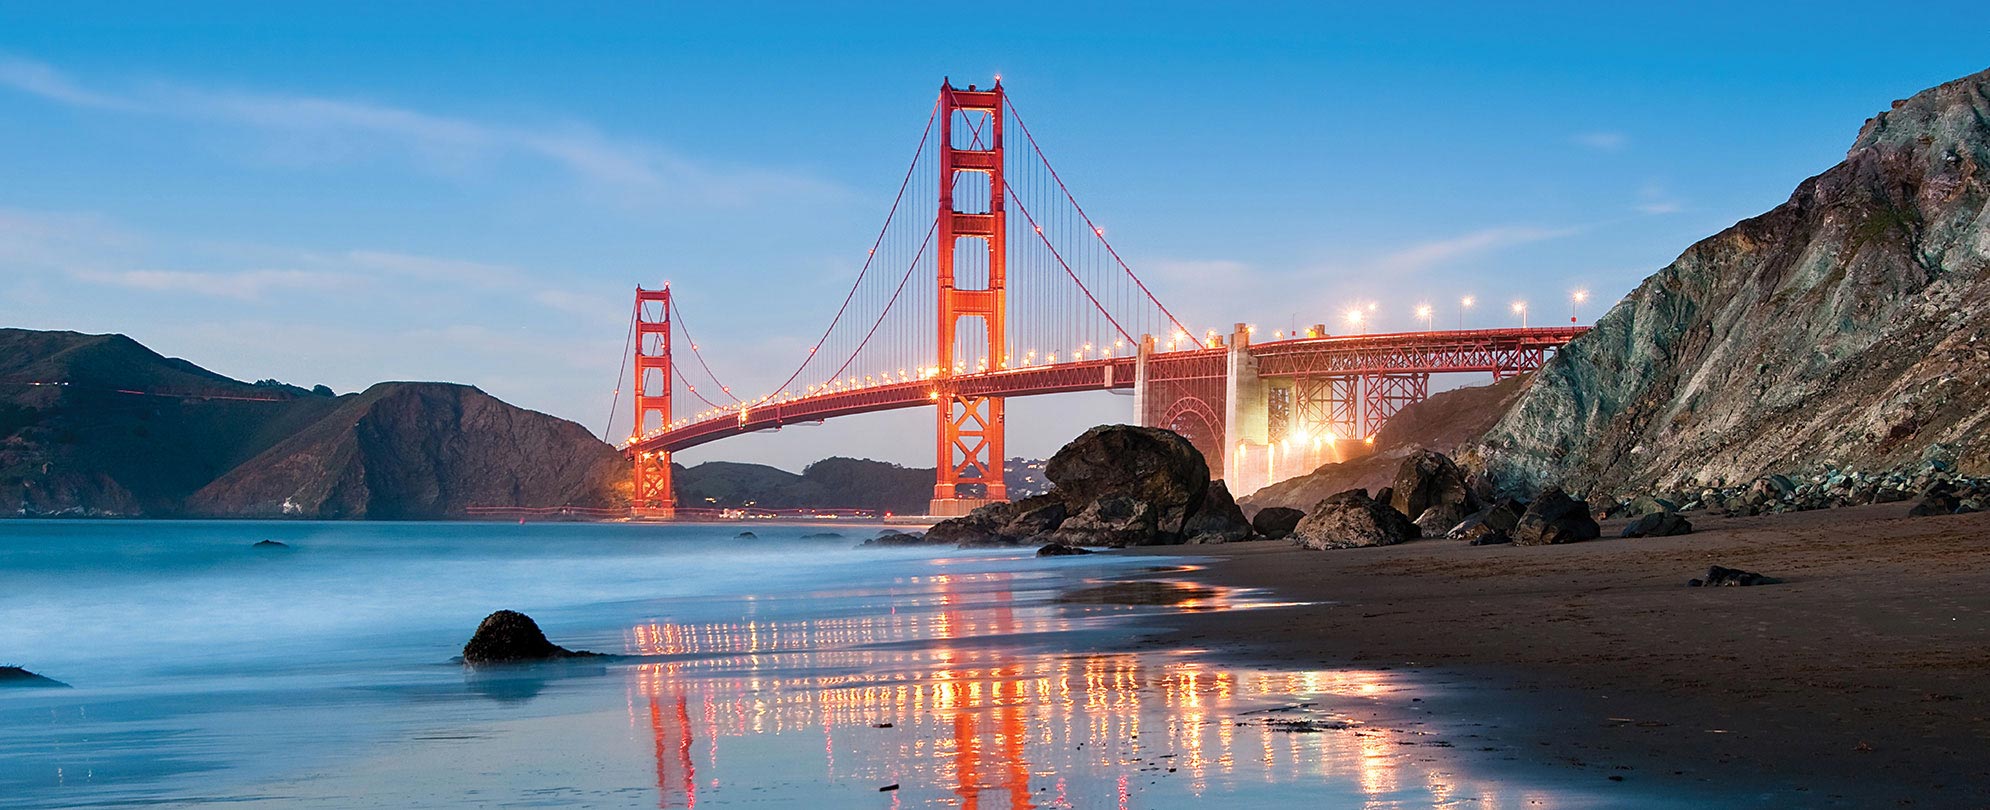 A view of the Golden Gate Bridge in San Francisco from the Golden Gate National Recreation Area